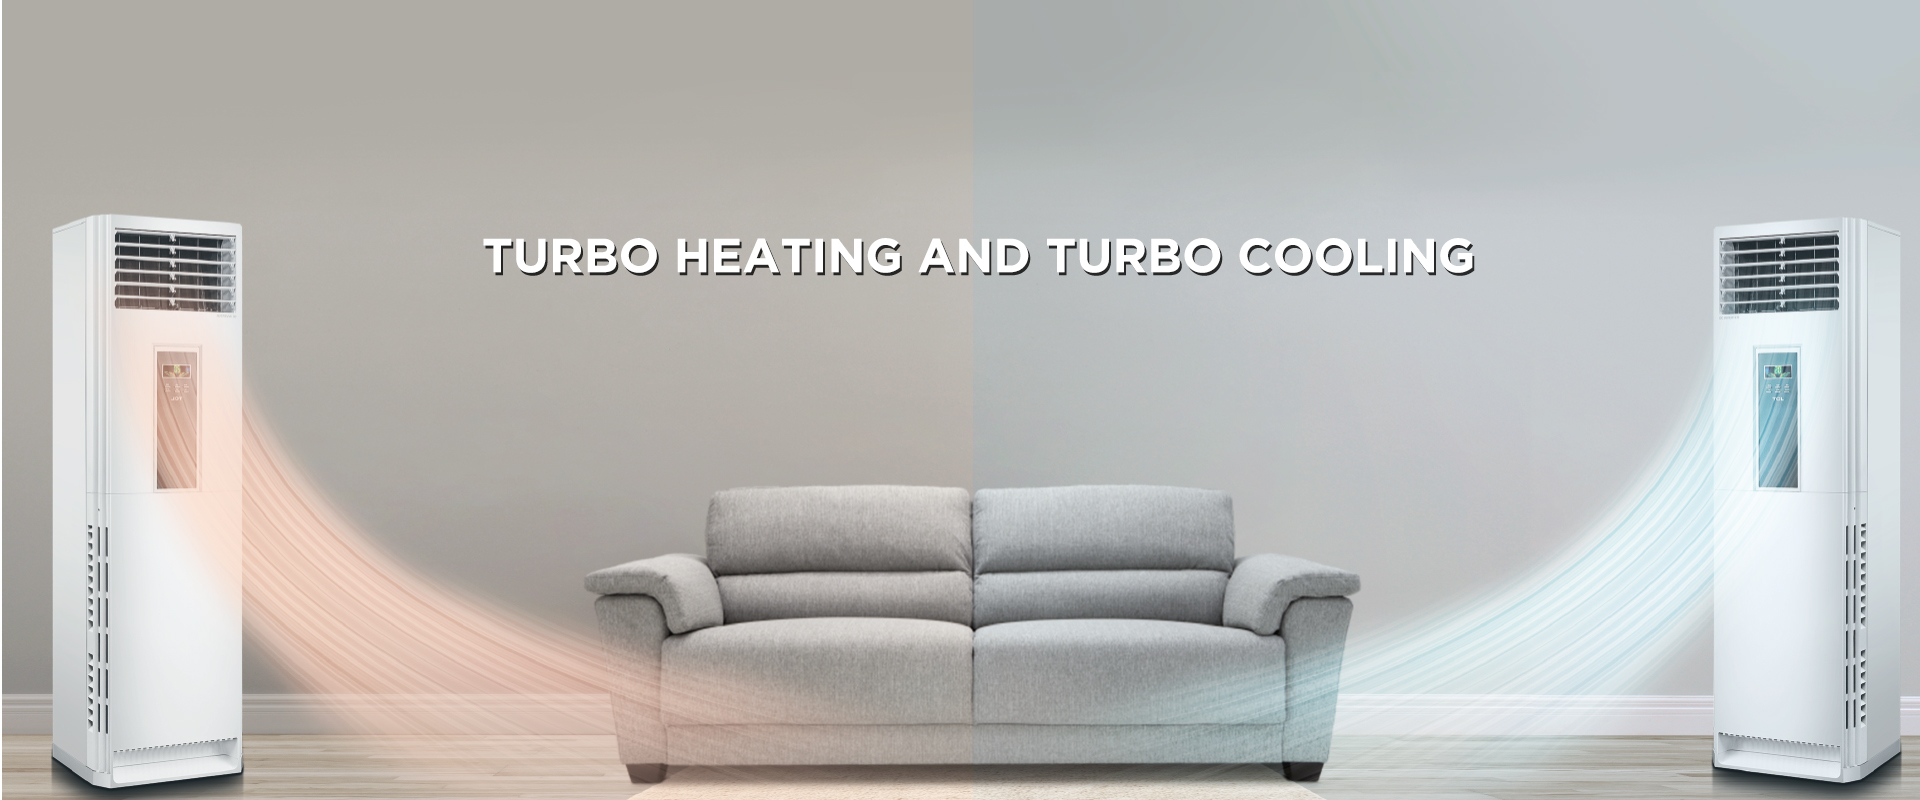 Turbo Cooling and Turbo Heating